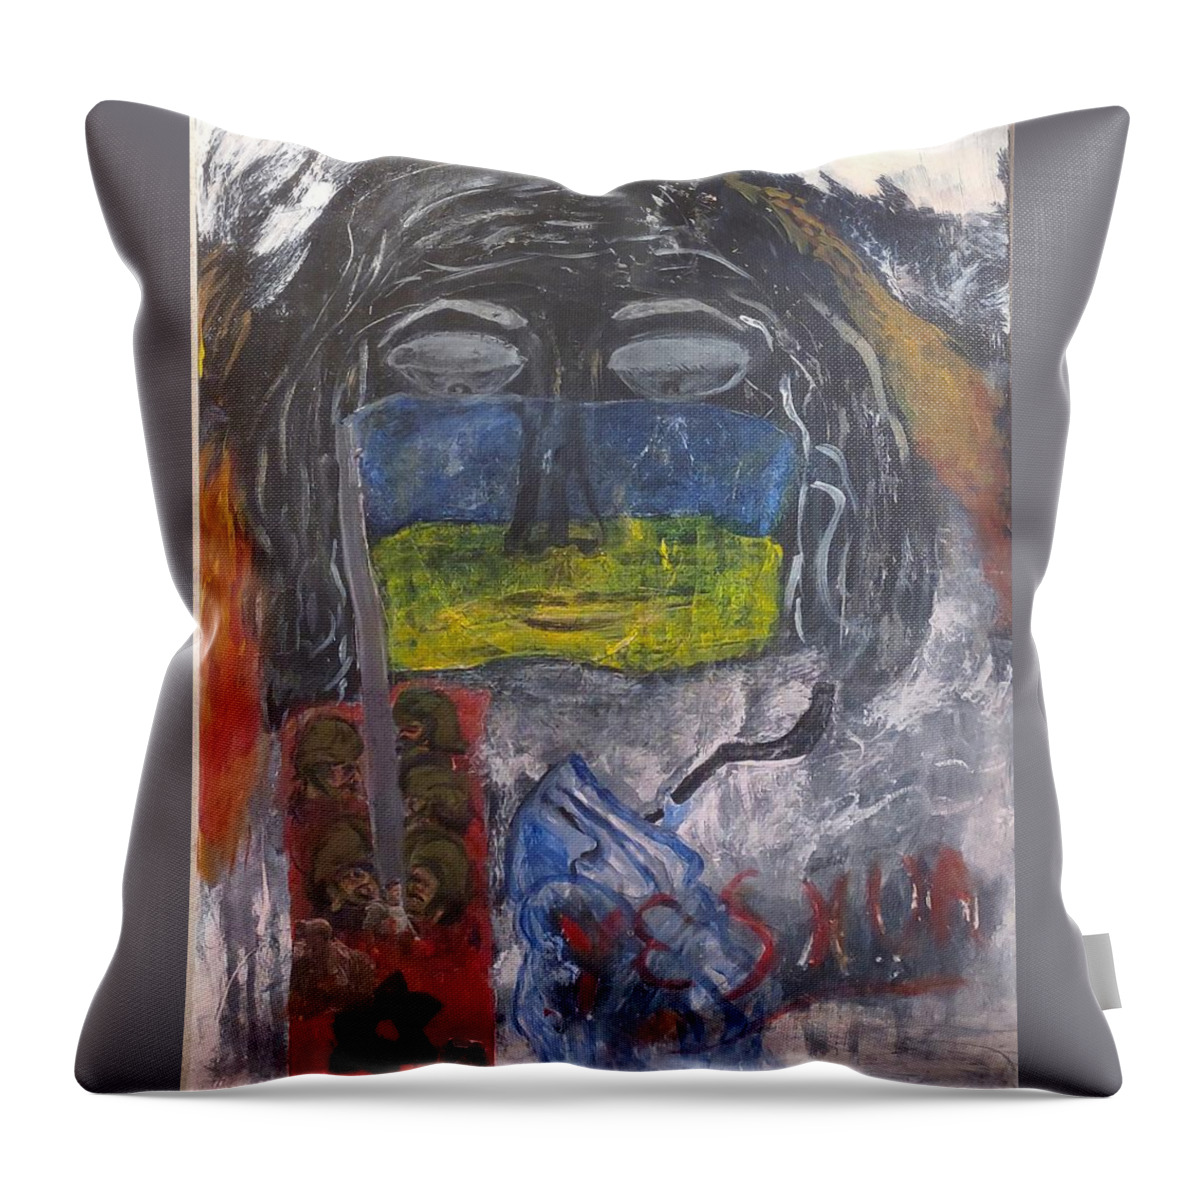 Yeshua Throw Pillow featuring the mixed media Yeshua by Suzanne Berthier